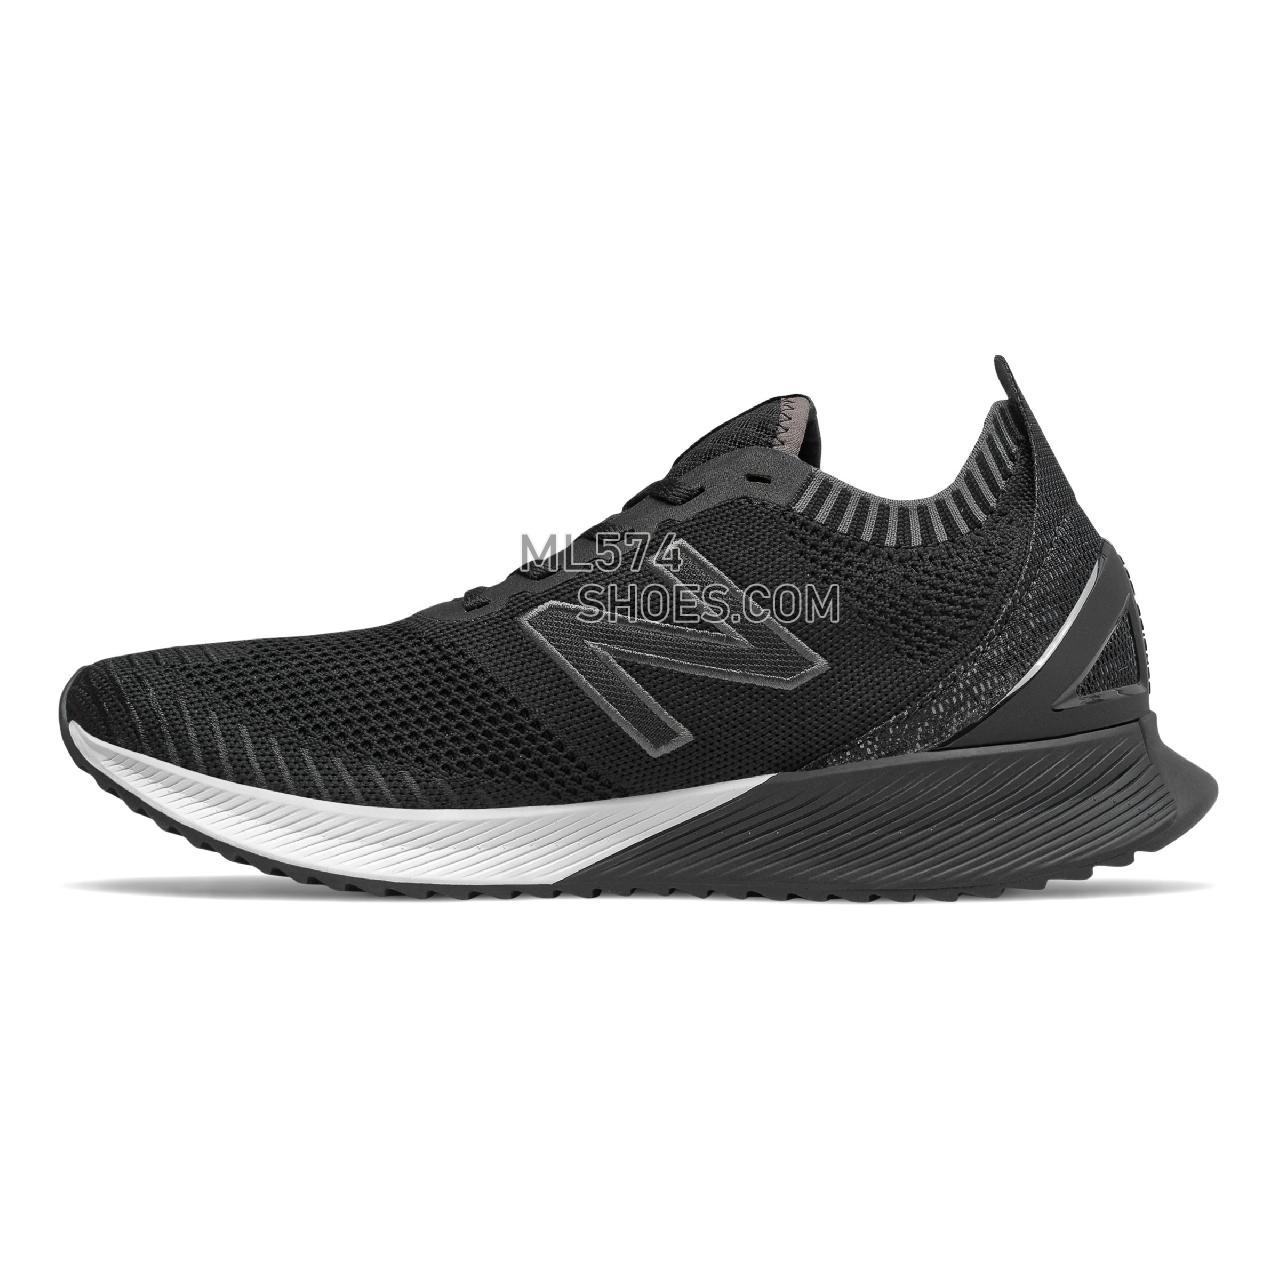 New Balance FuelCell Echo - Men's Neutral Running - Black with Magnet and White - MFCECSK